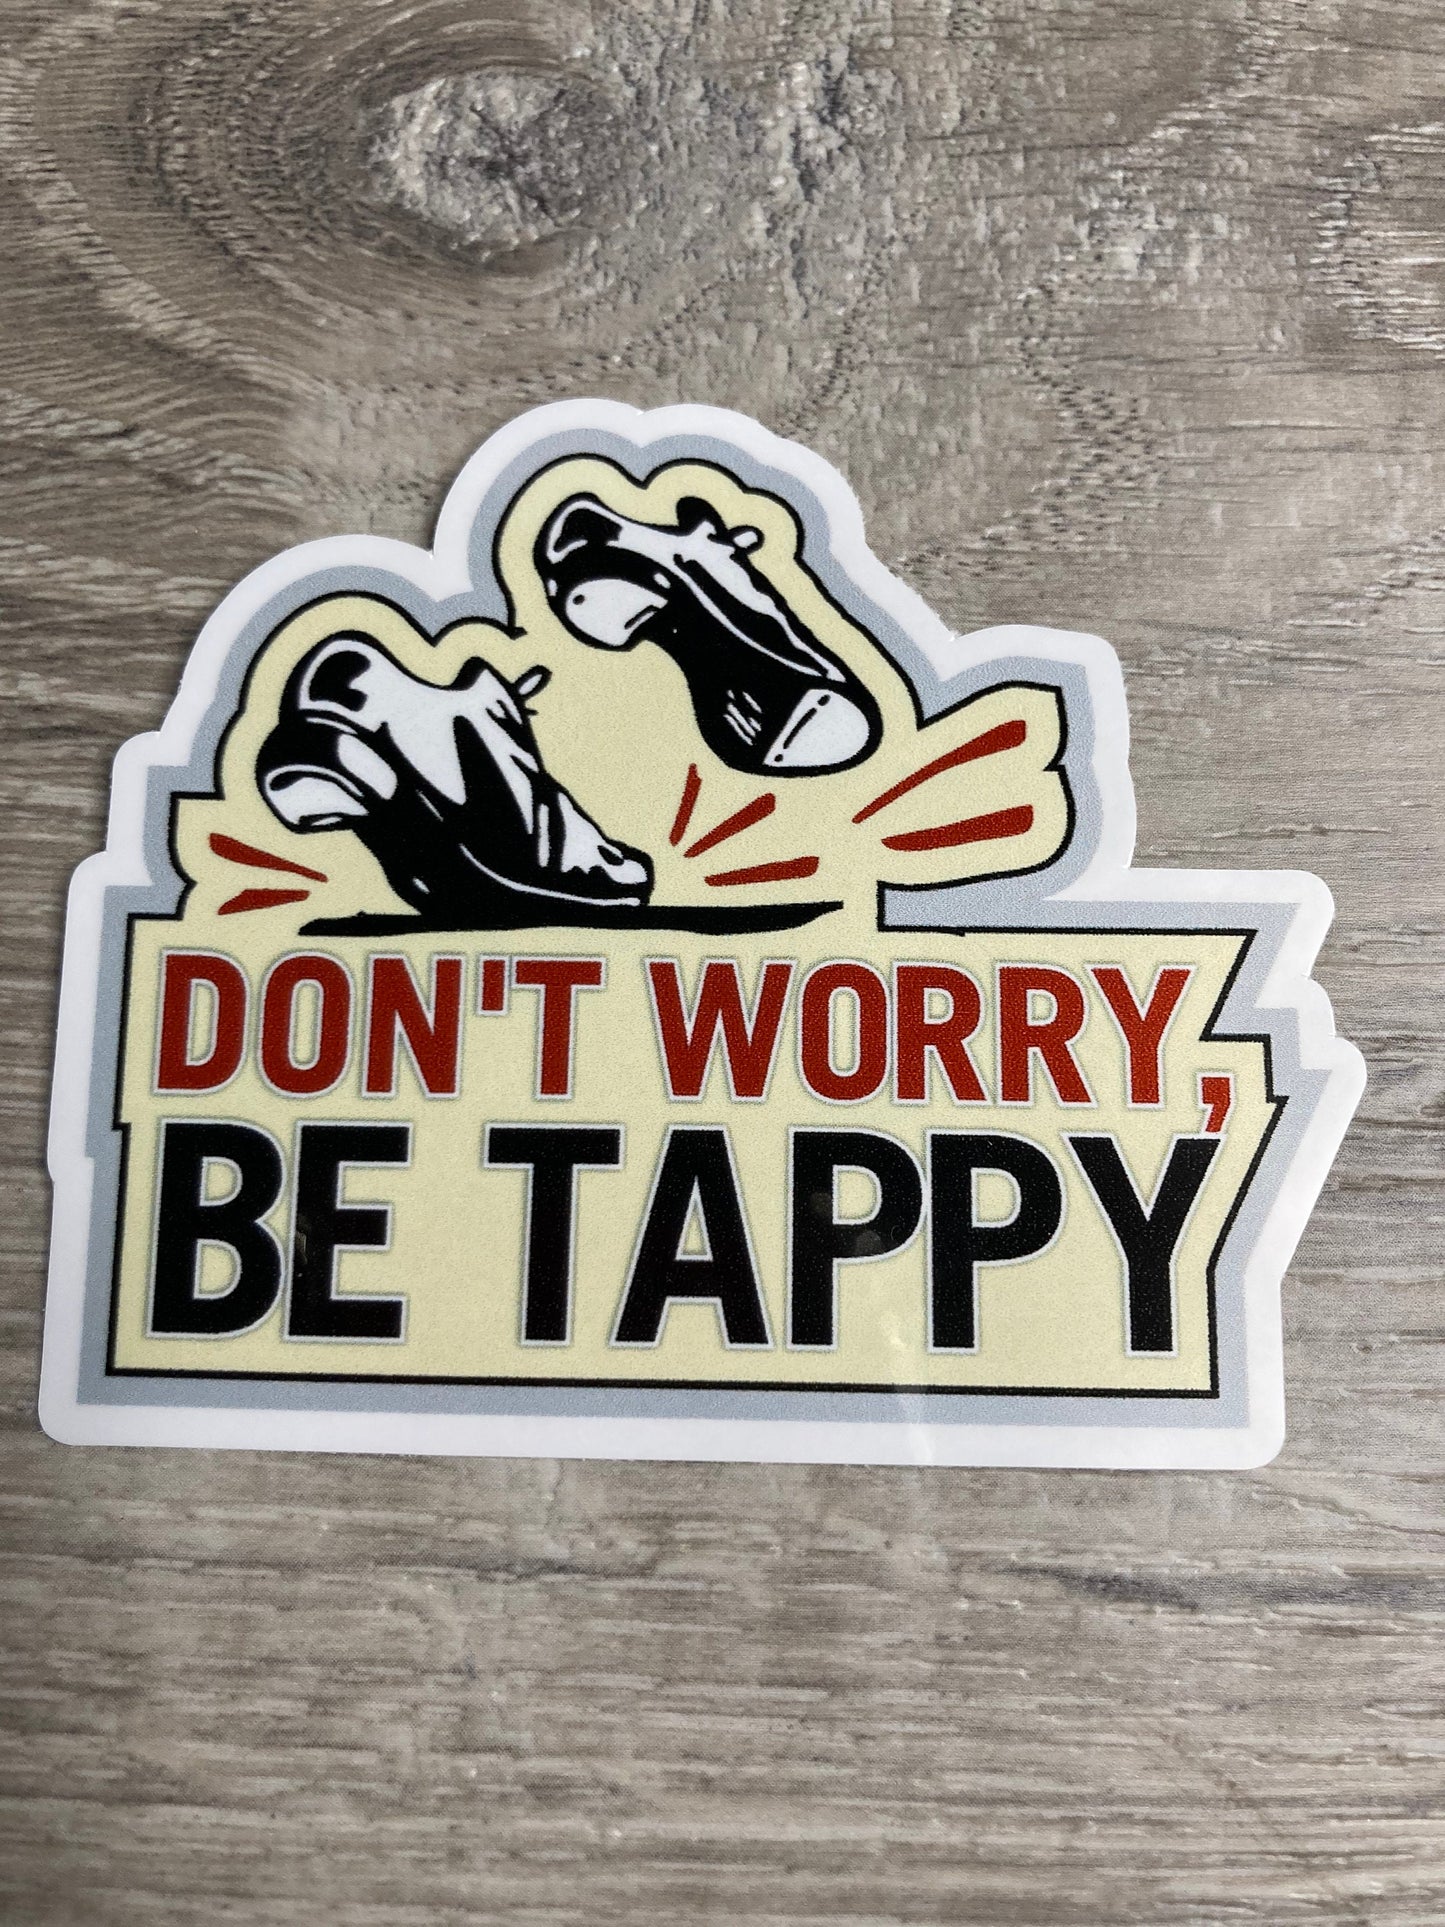 Don’t Worry, Be Tappy Vinyl Sticker, Vinyl Decal, Laptop Sticker, Dance Sticker, Gifts For Dancers, Ballet Gifts